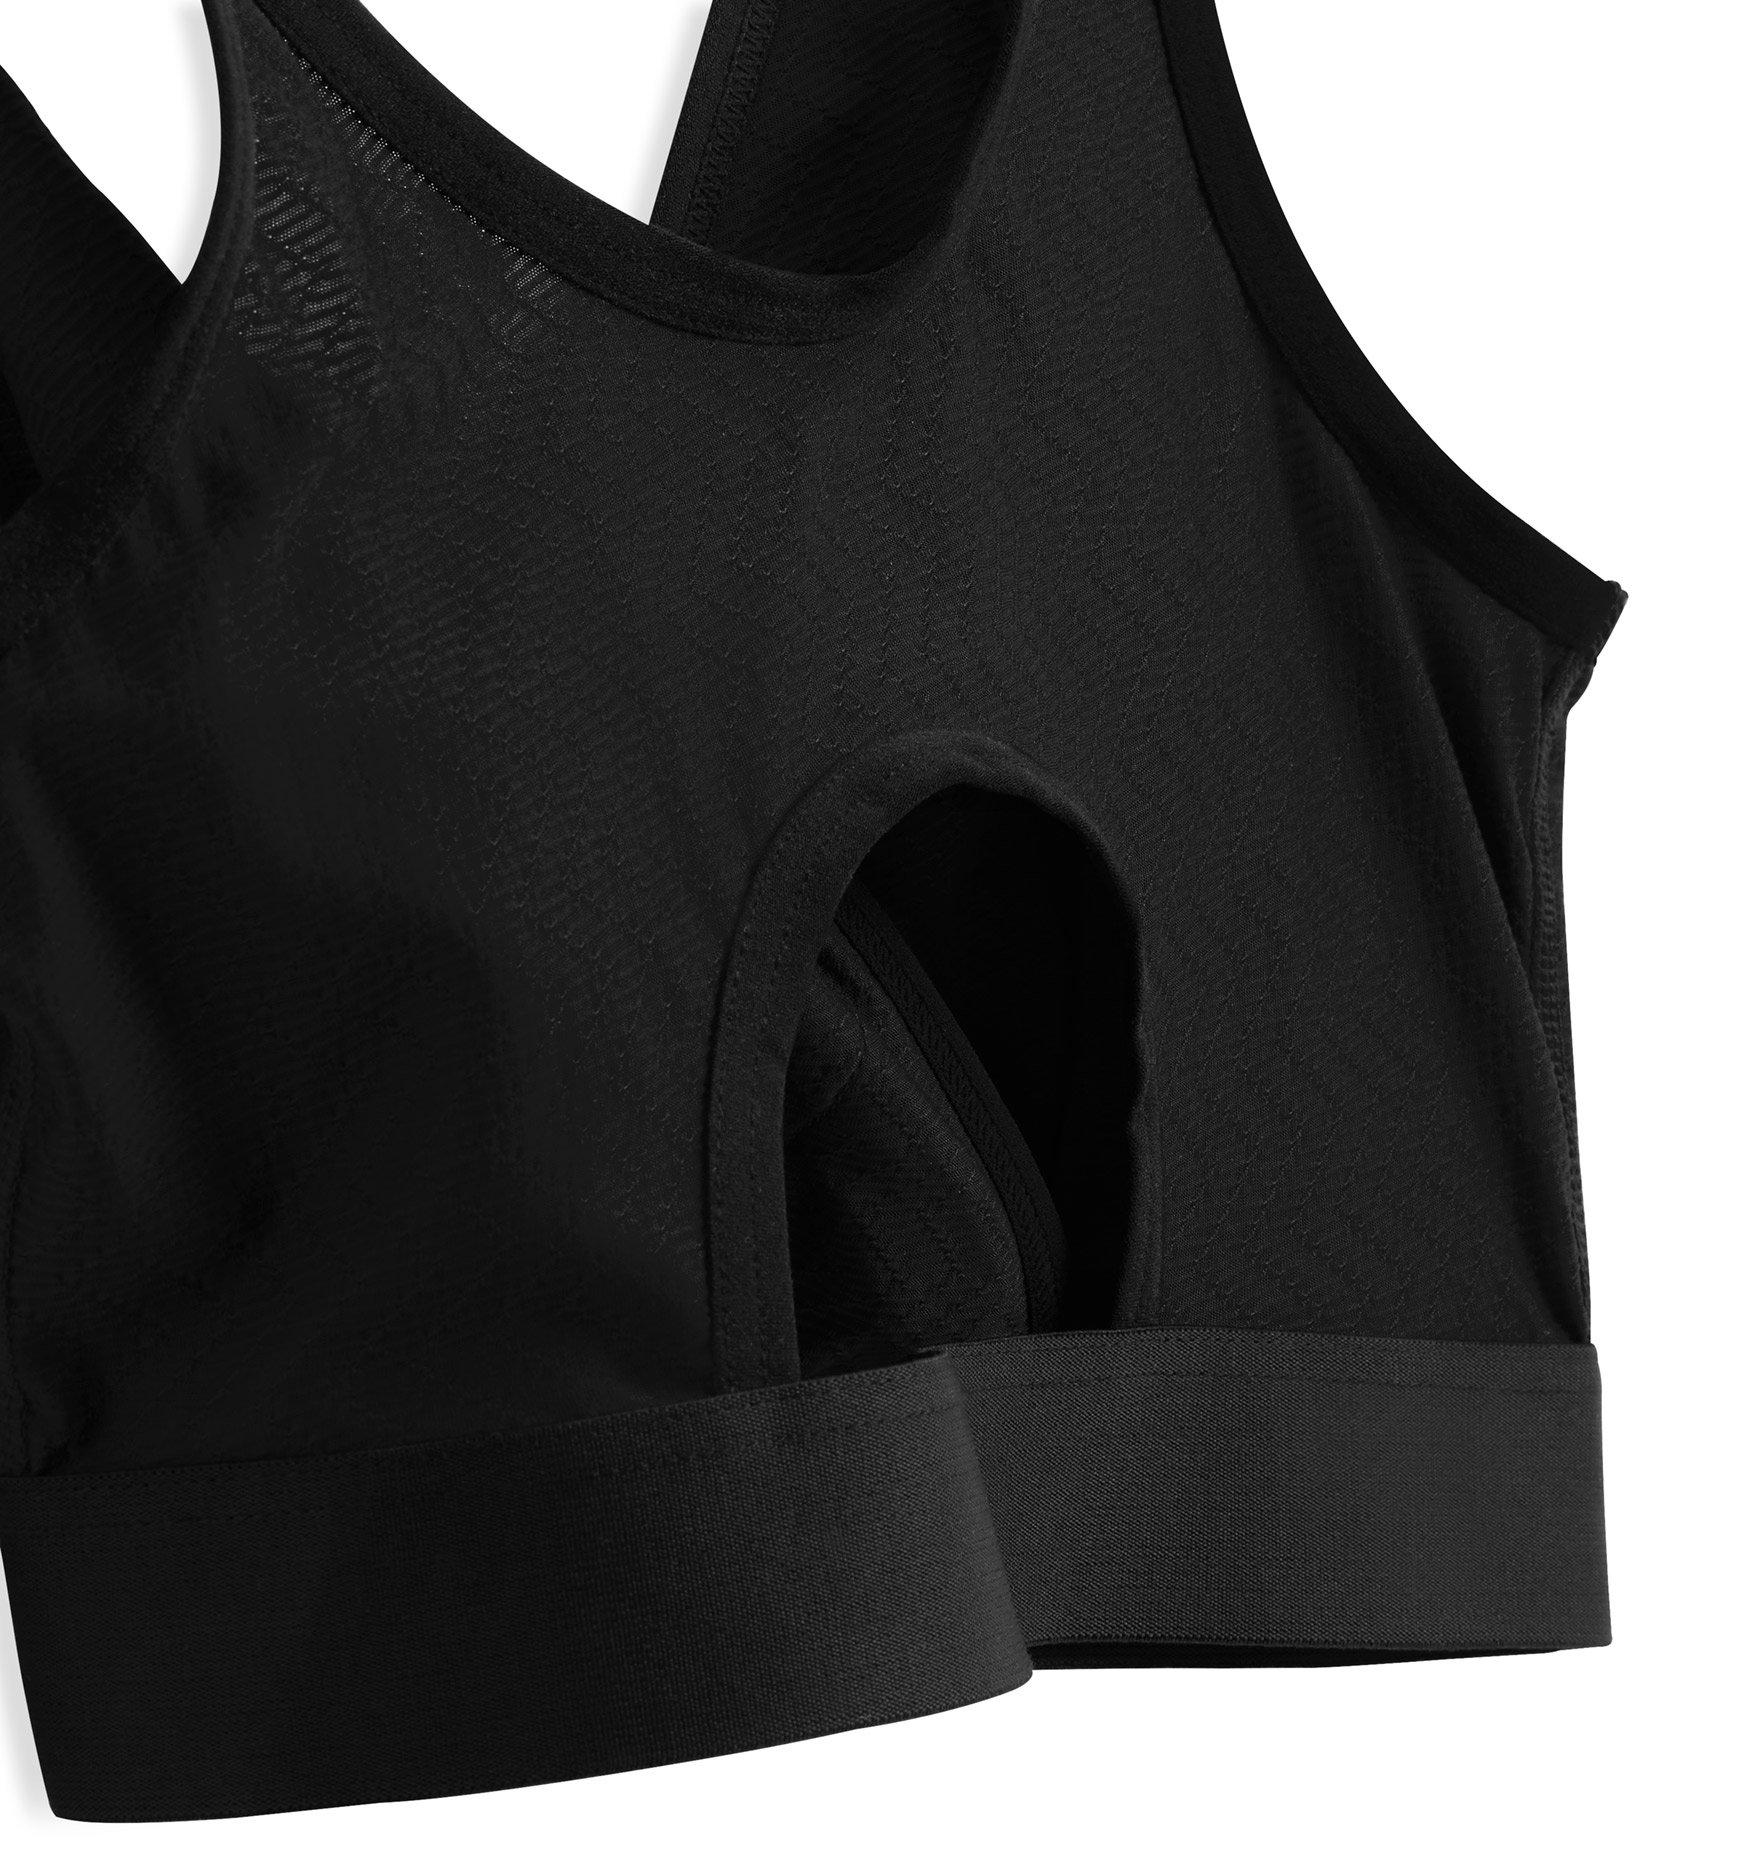 Black Vibe Crossover Sports Bra – Rigged active